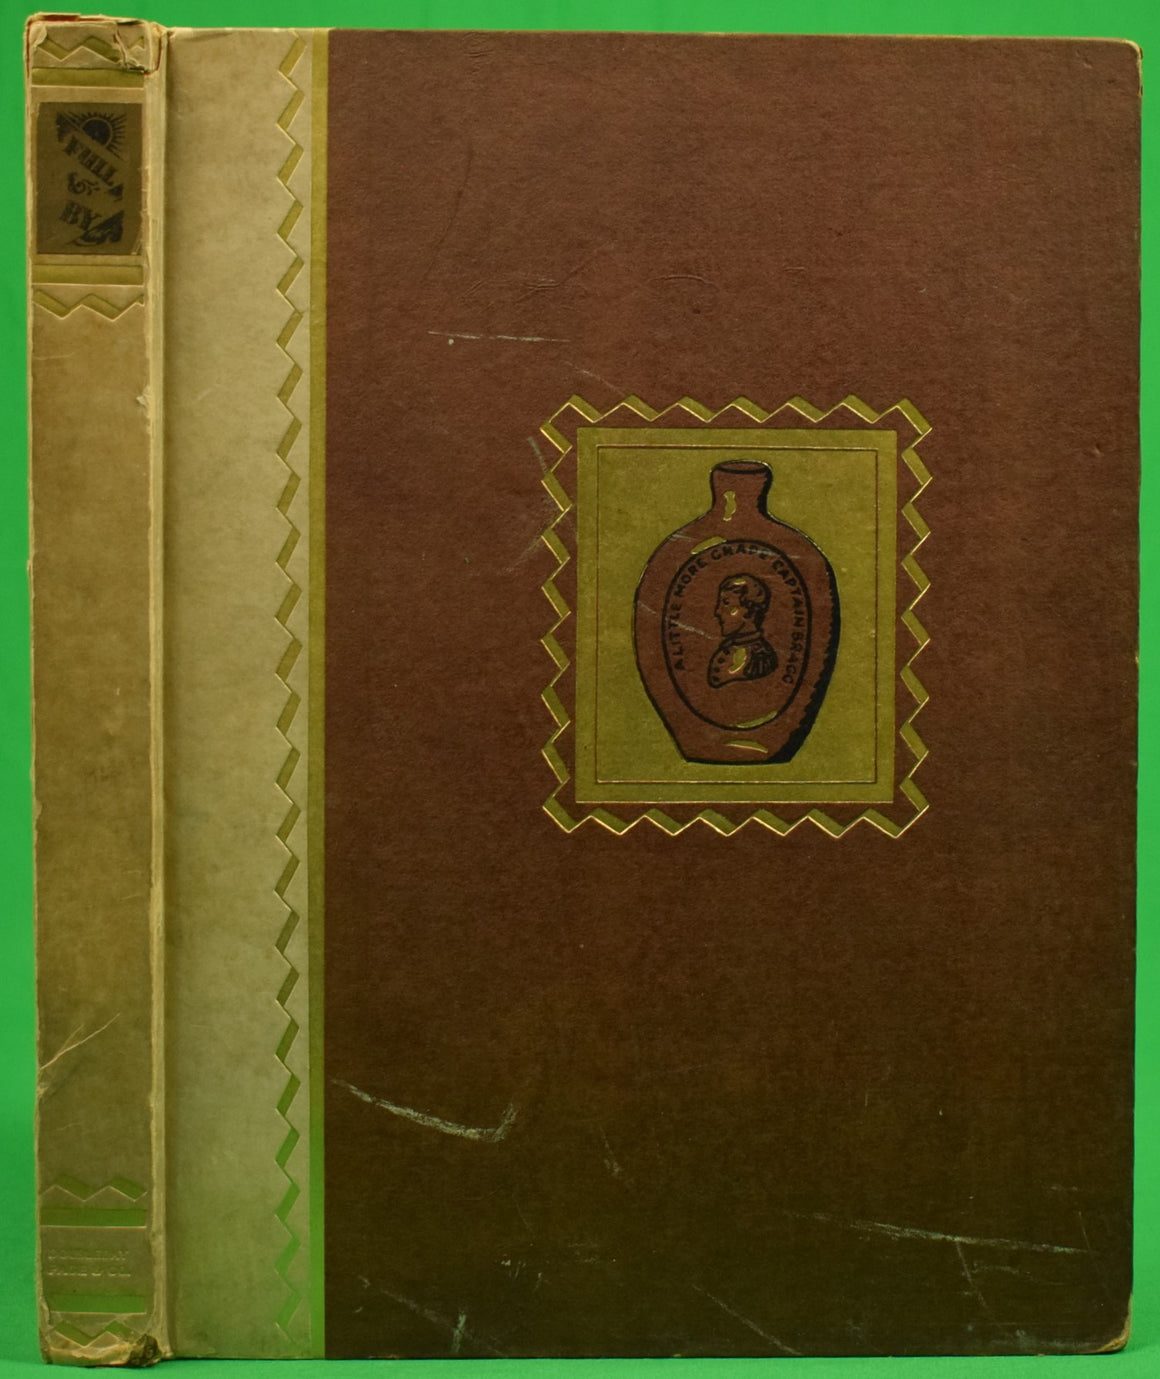 "Full And By: Being A Collection Of Verses By Persons Of Quality In Praise Of Drinking" 1925